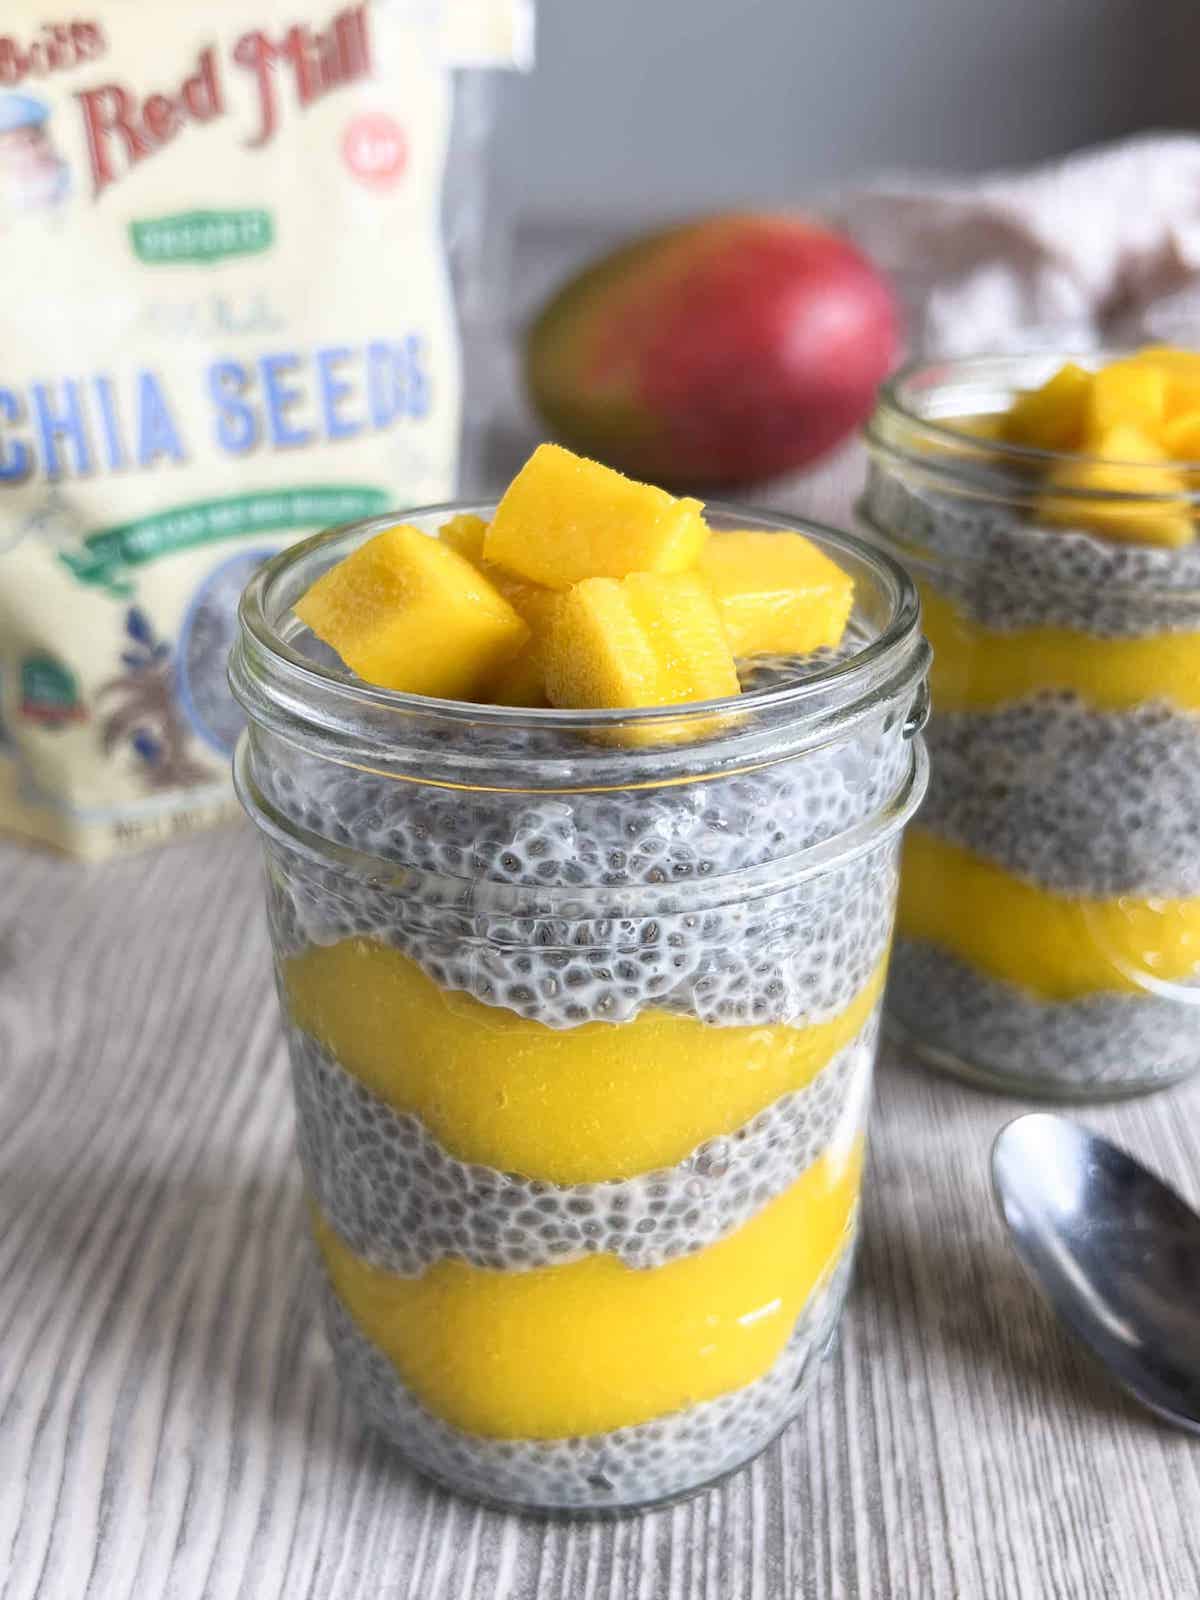 Chia pudding and mango puree layered in a mason jar with fresh mango chunks on top. Mango and bag of Bob's Red Mill chia seeds in the background.